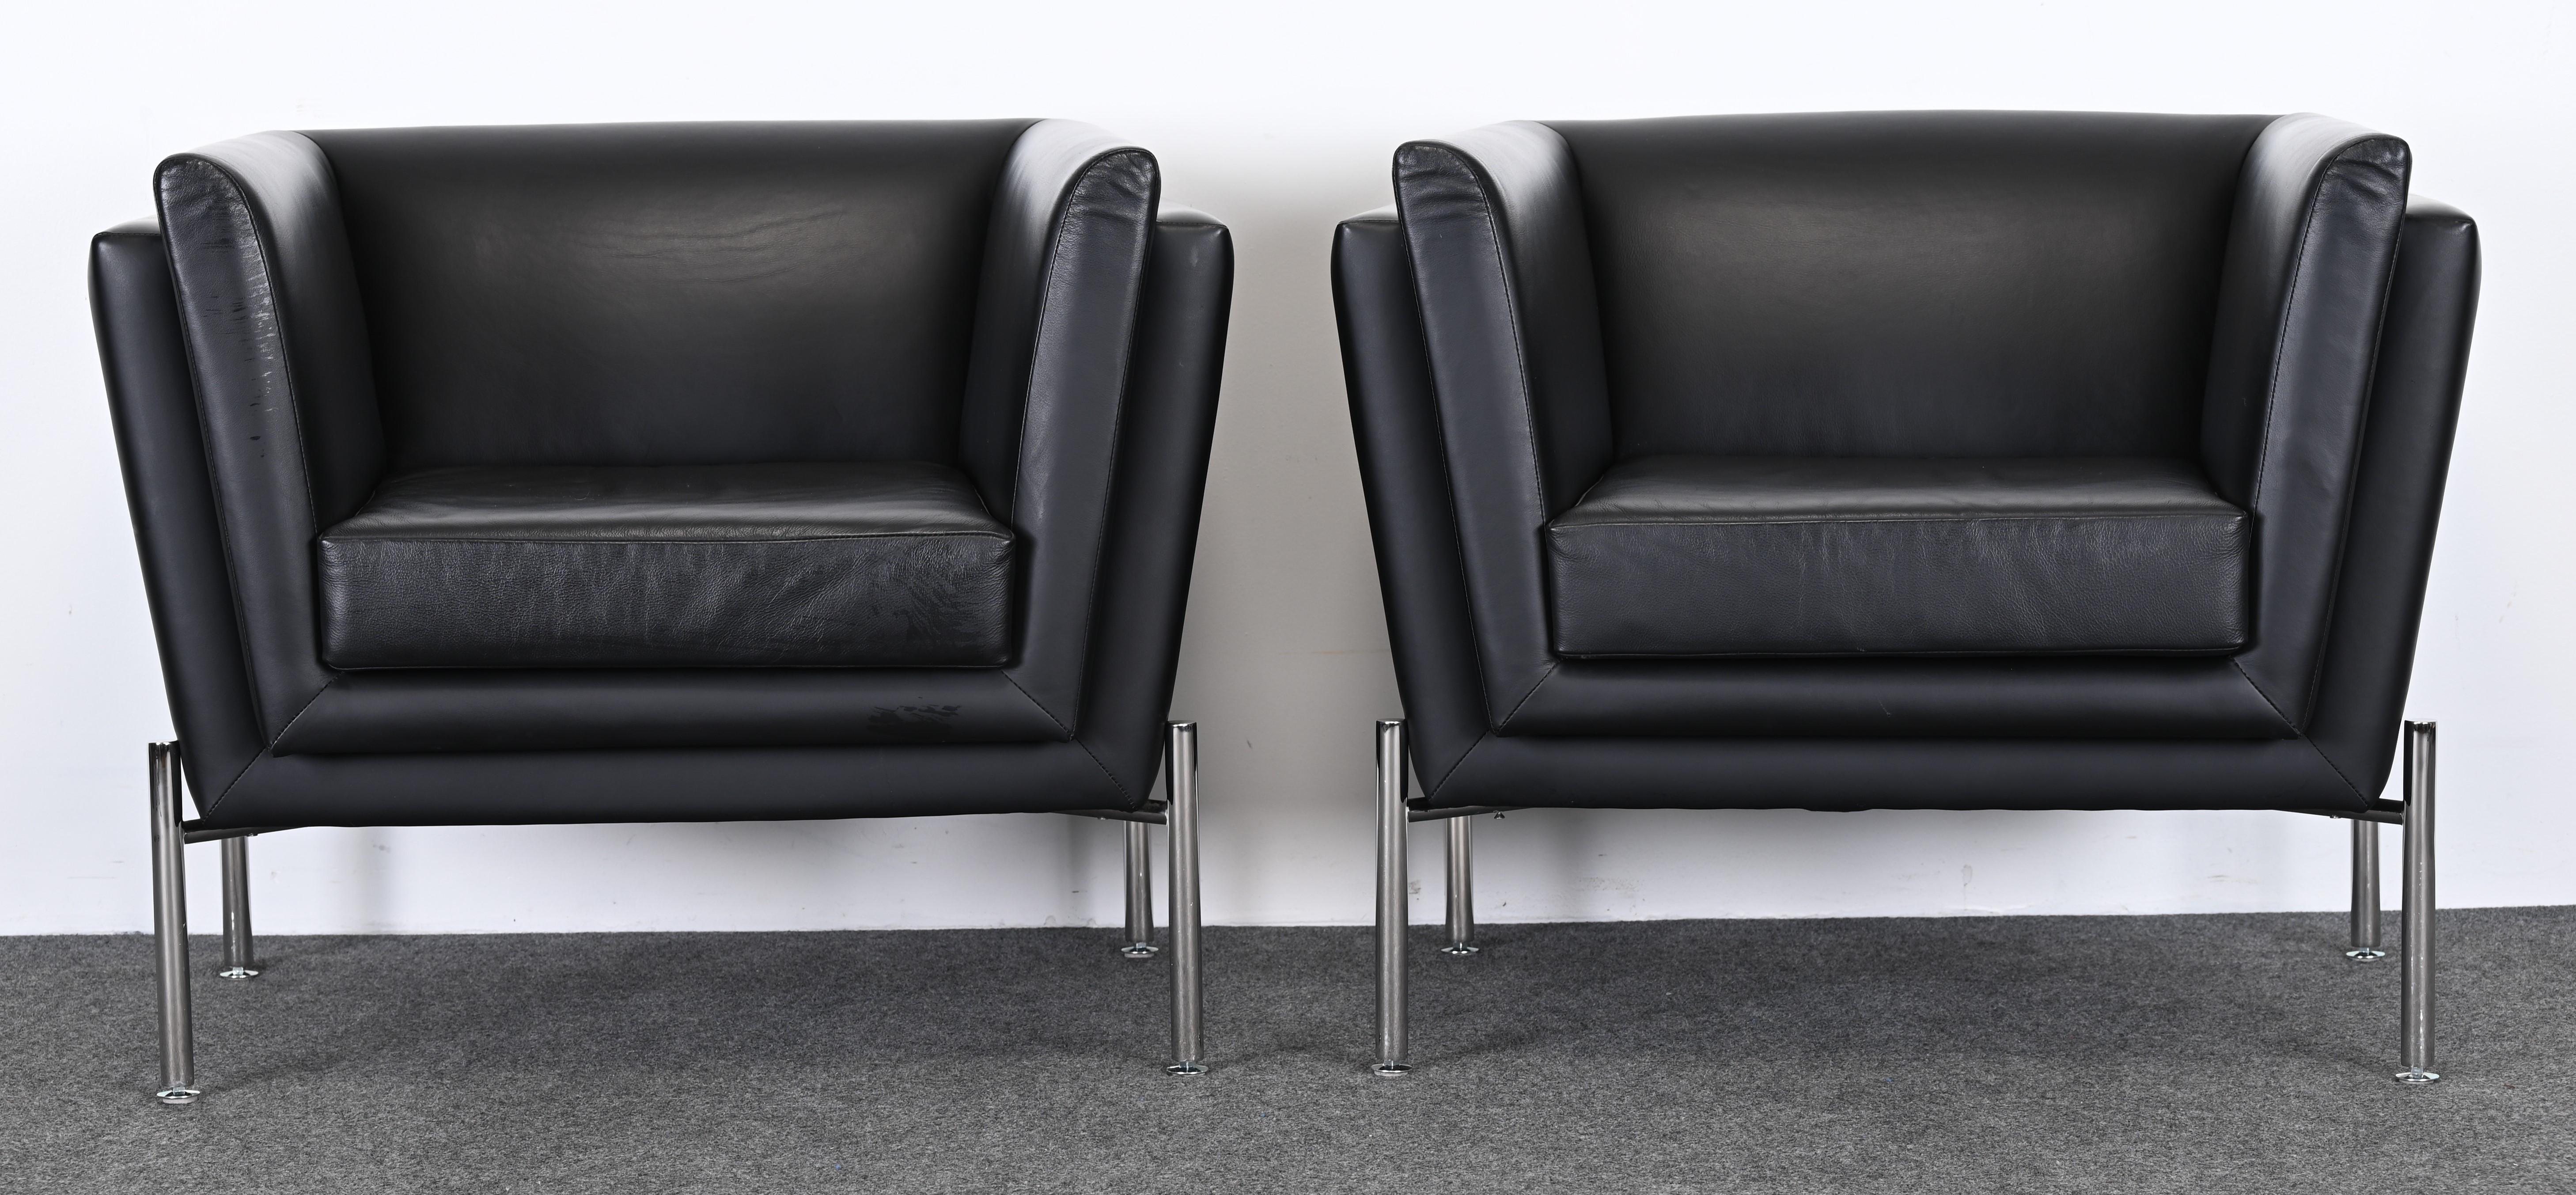 Pair of Leather and Stainless Steel Lounge Chairs by Brueton, 20th Century For Sale 3